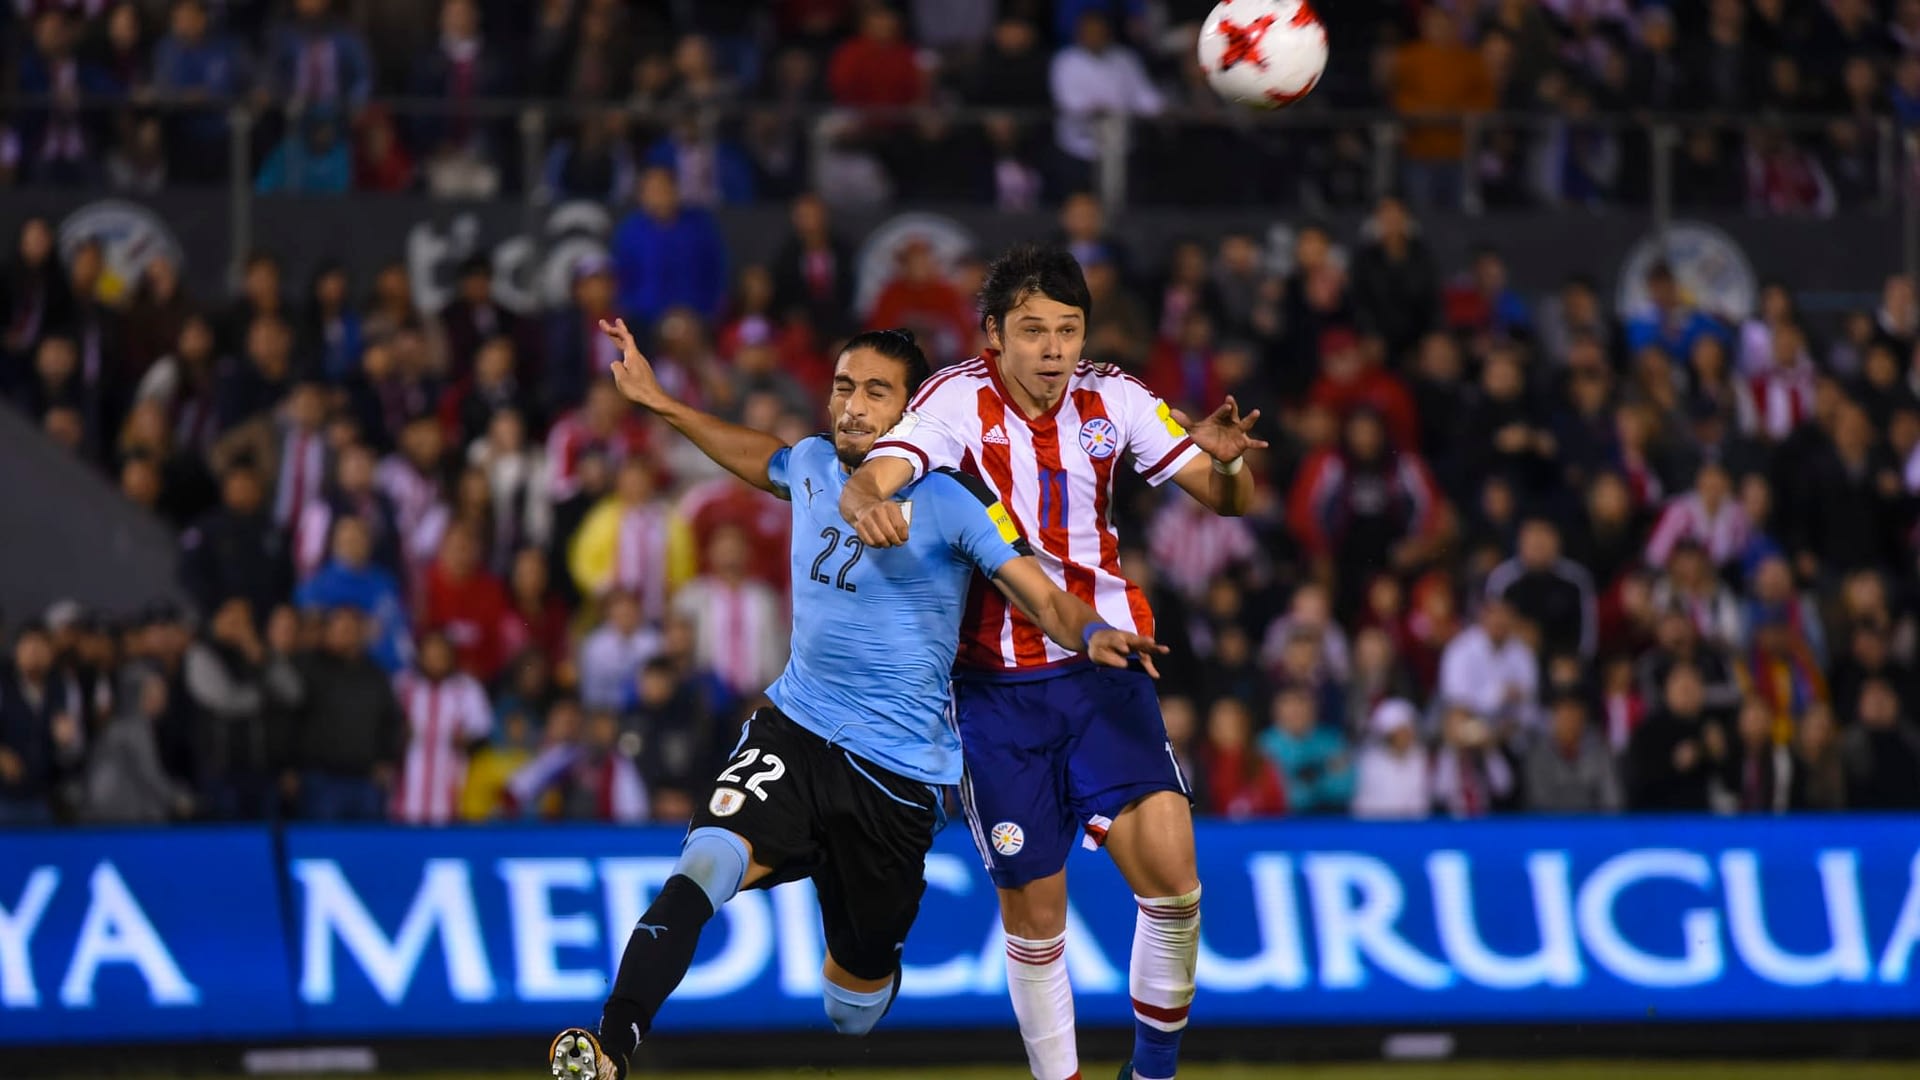 Uruguay's Martin Caceres (L) and Paraguay's Angel Romero jump for the ball